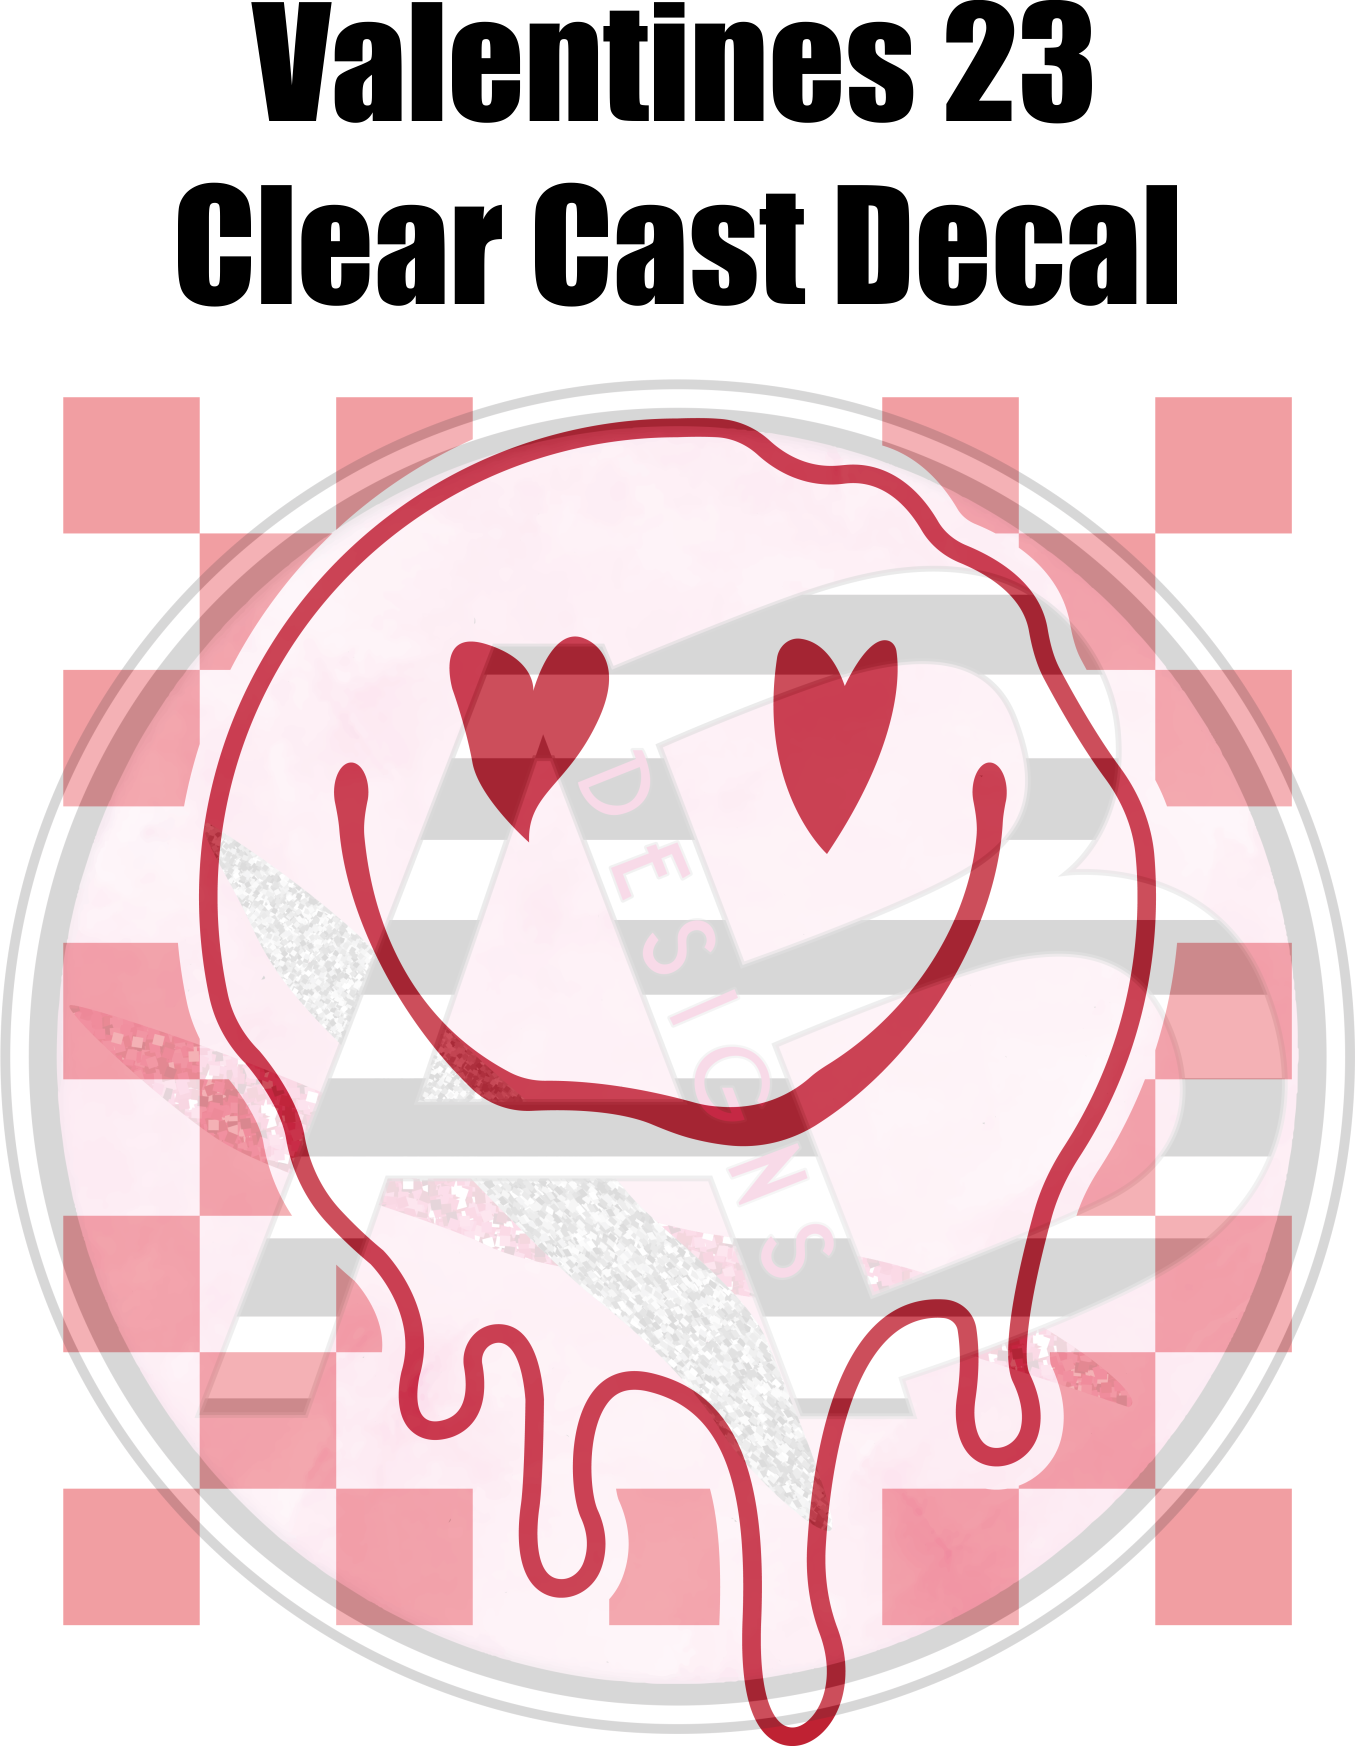 Valentines 23 - Clear Cast Decal